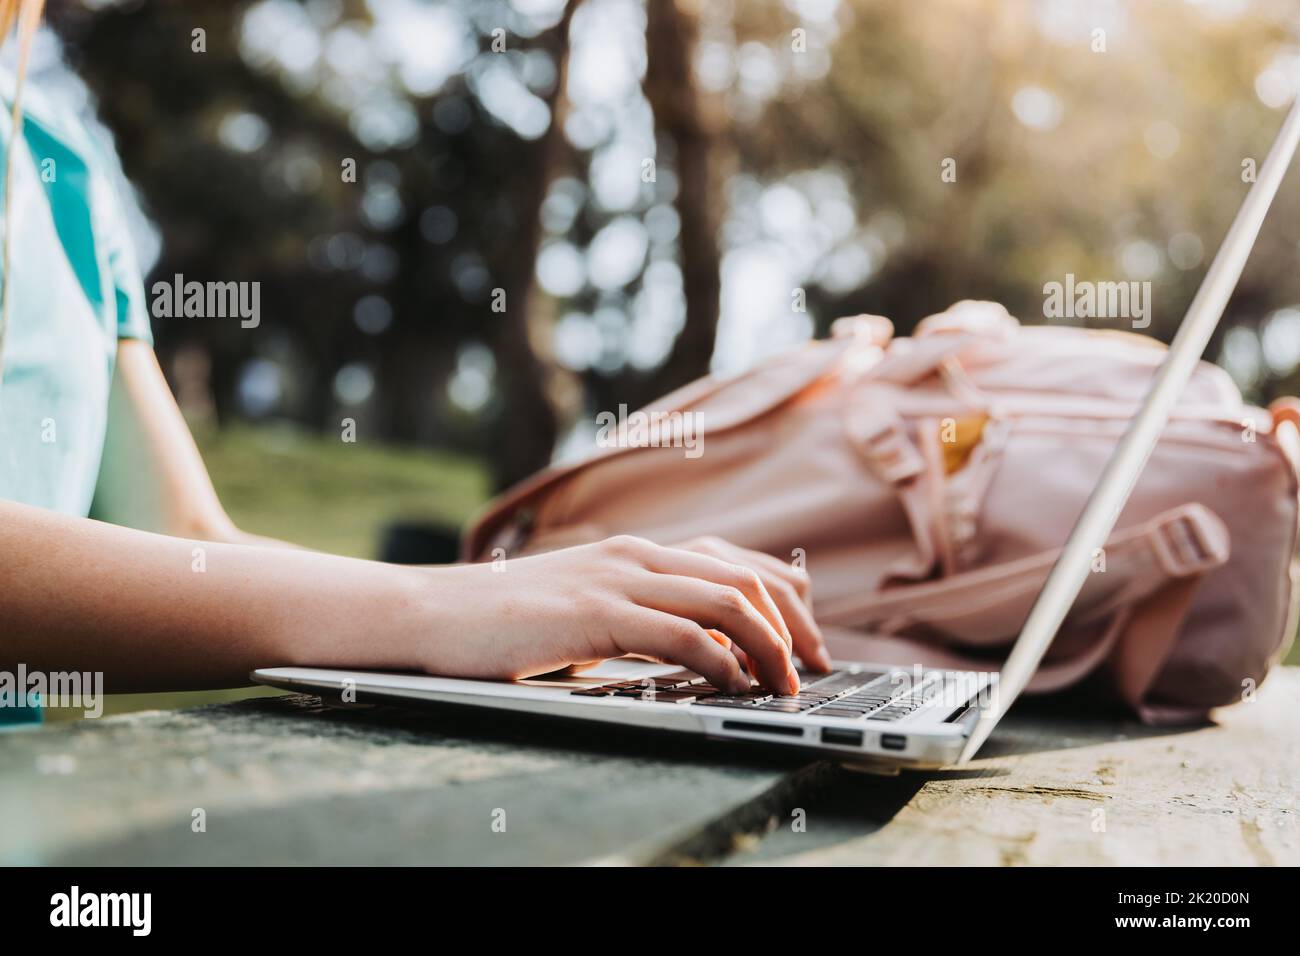 Female unrecognizable university student using her laptop in campus natural park. Turquoise t shirt and pink backpack. Stock Photo